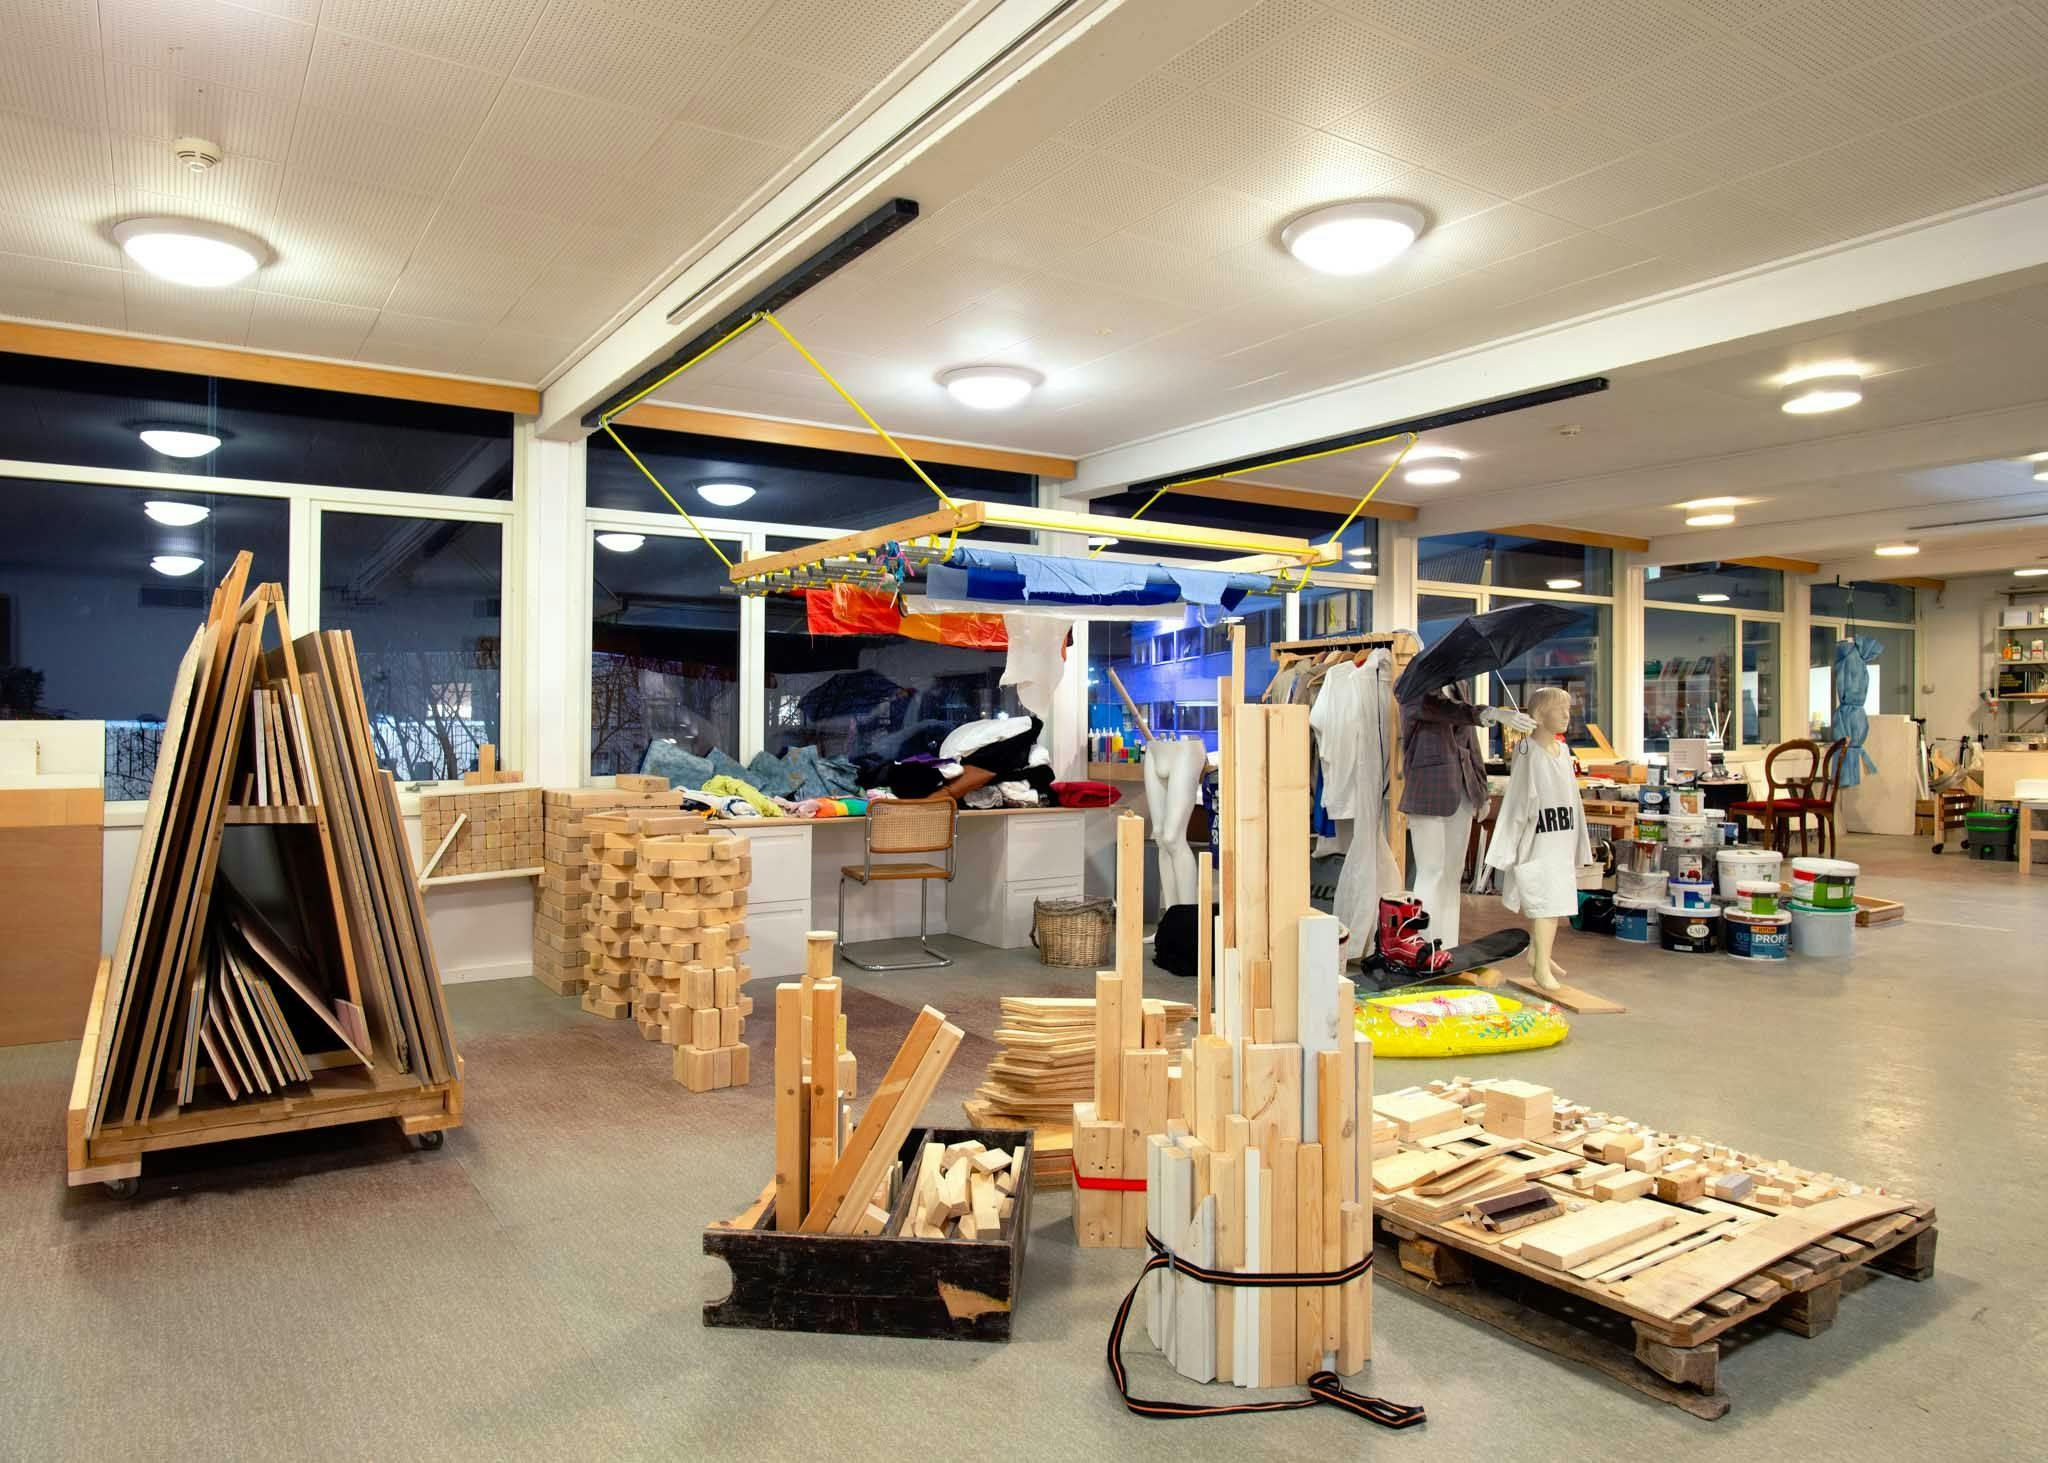 Various wooden items are organised by form and size in a large room.